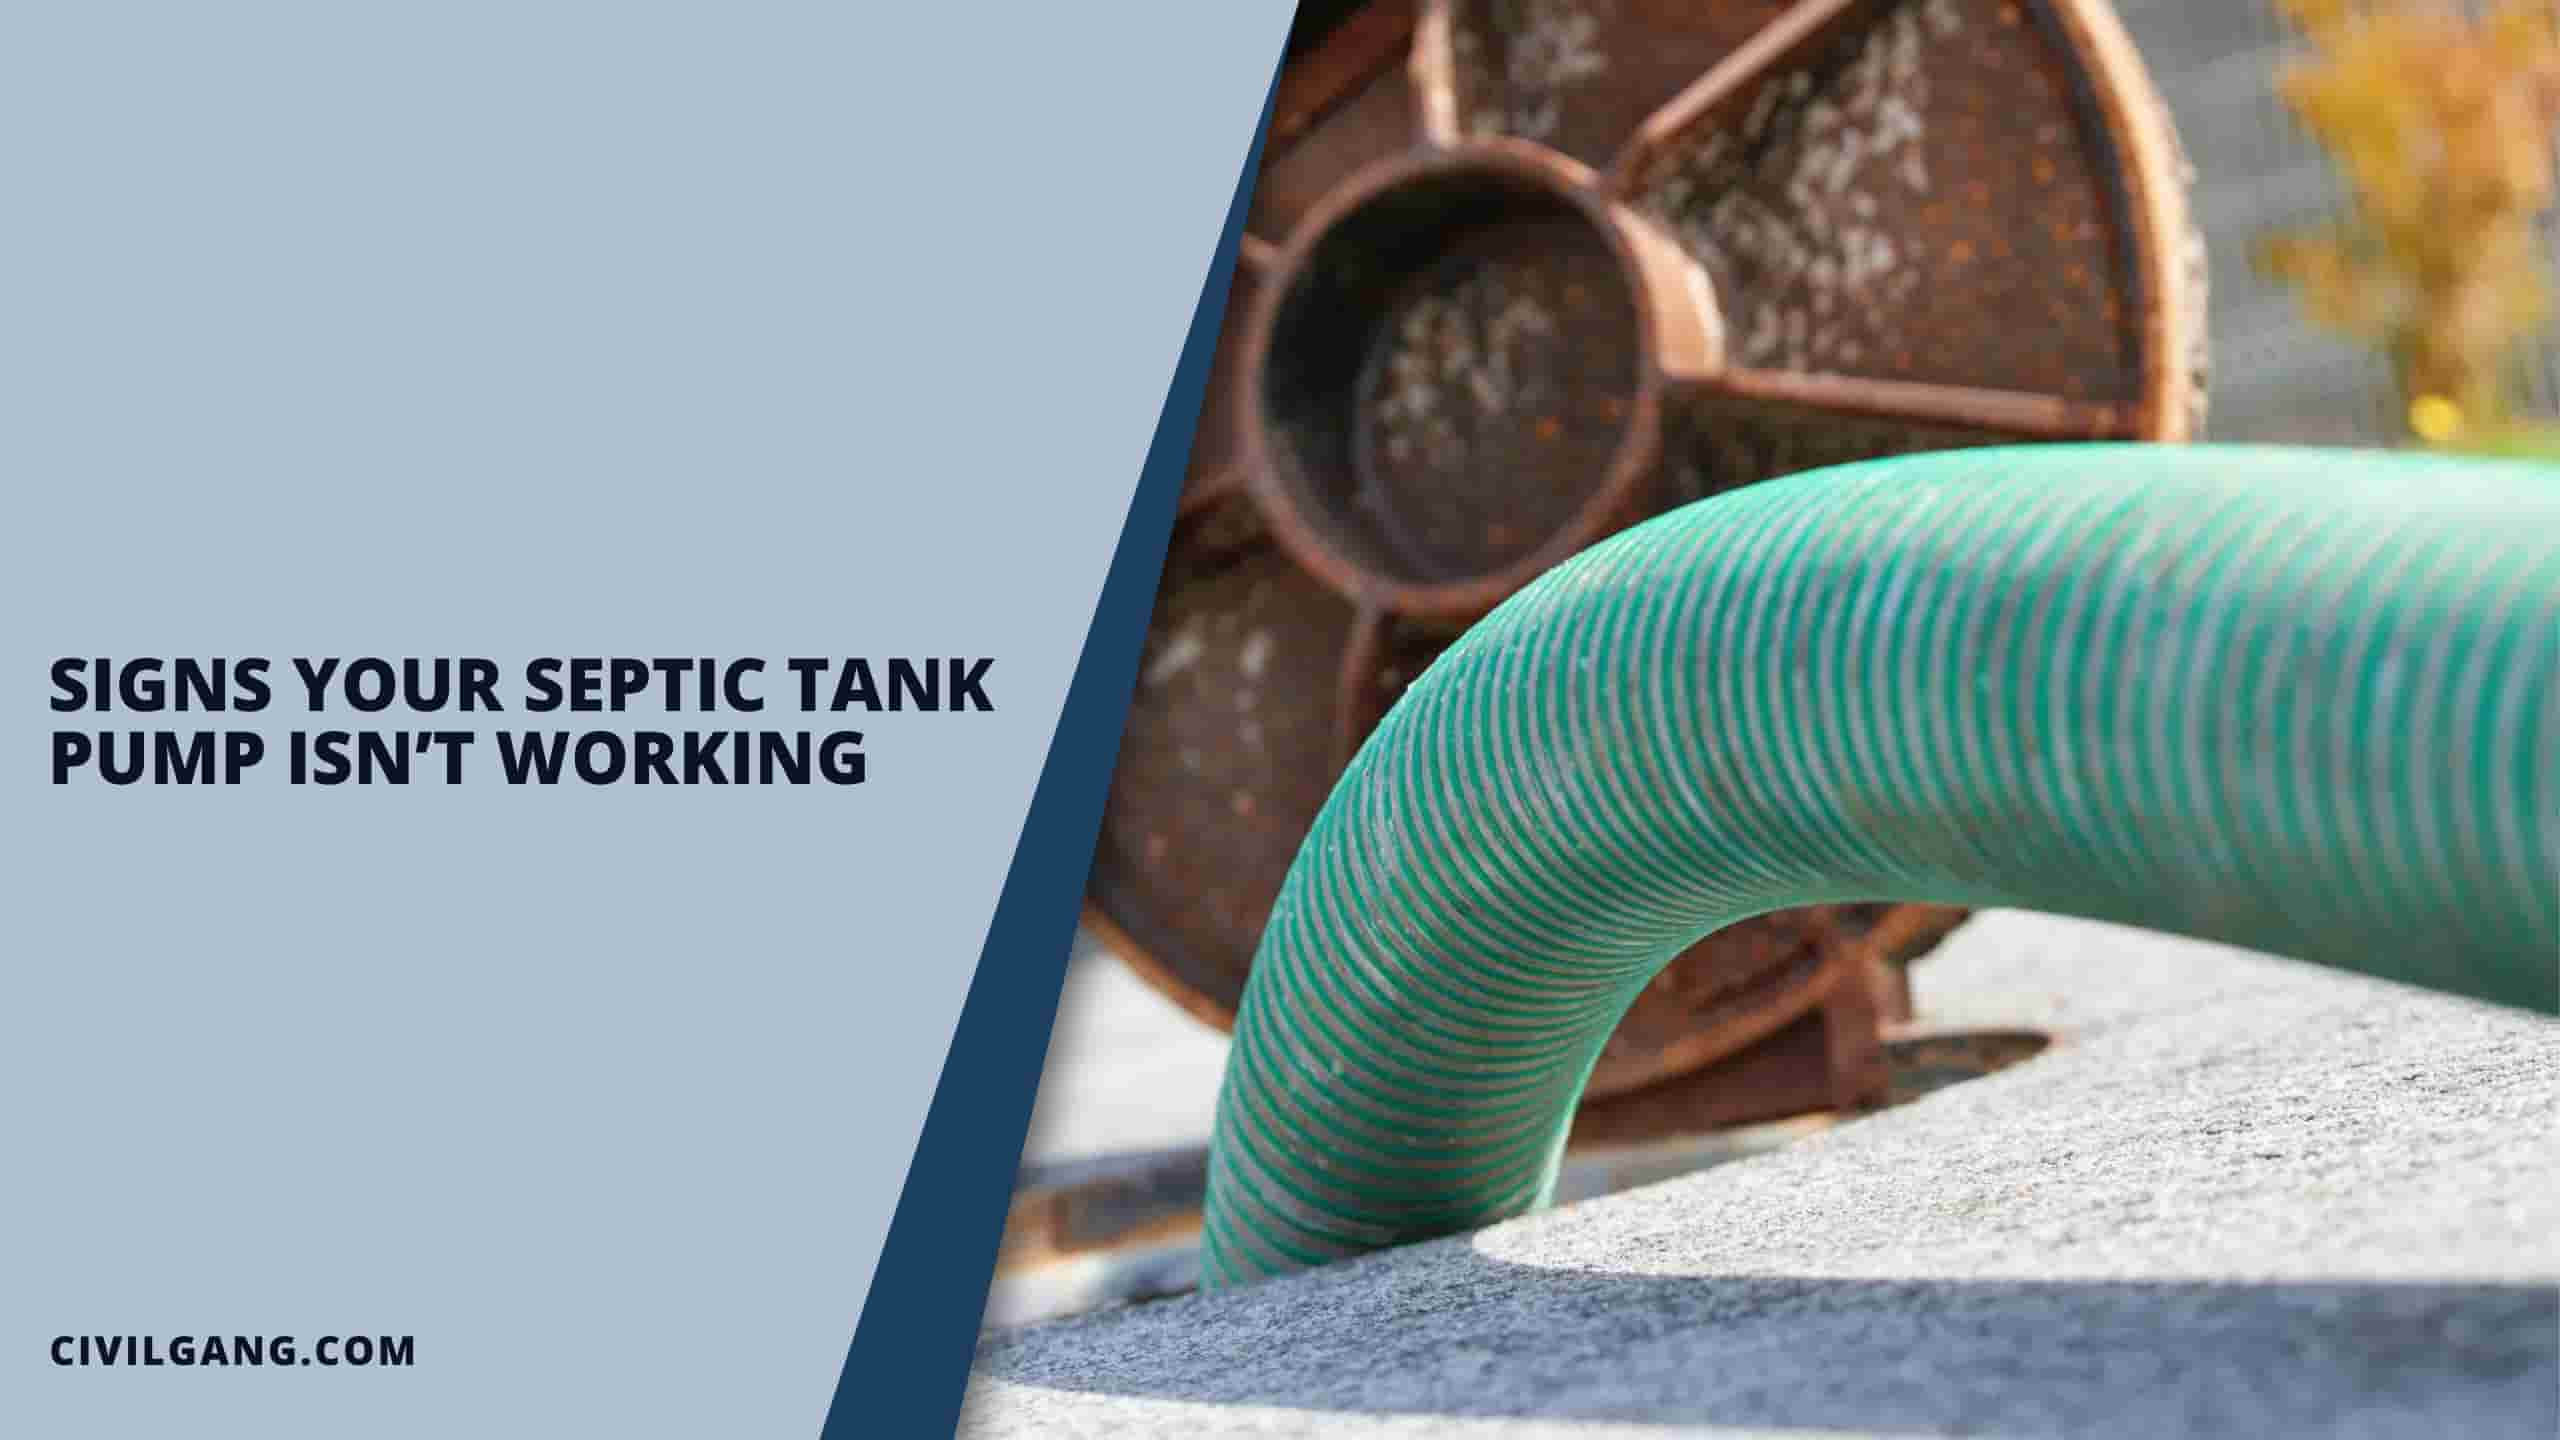 Signs Your Septic Tank Pump Isn’t Working